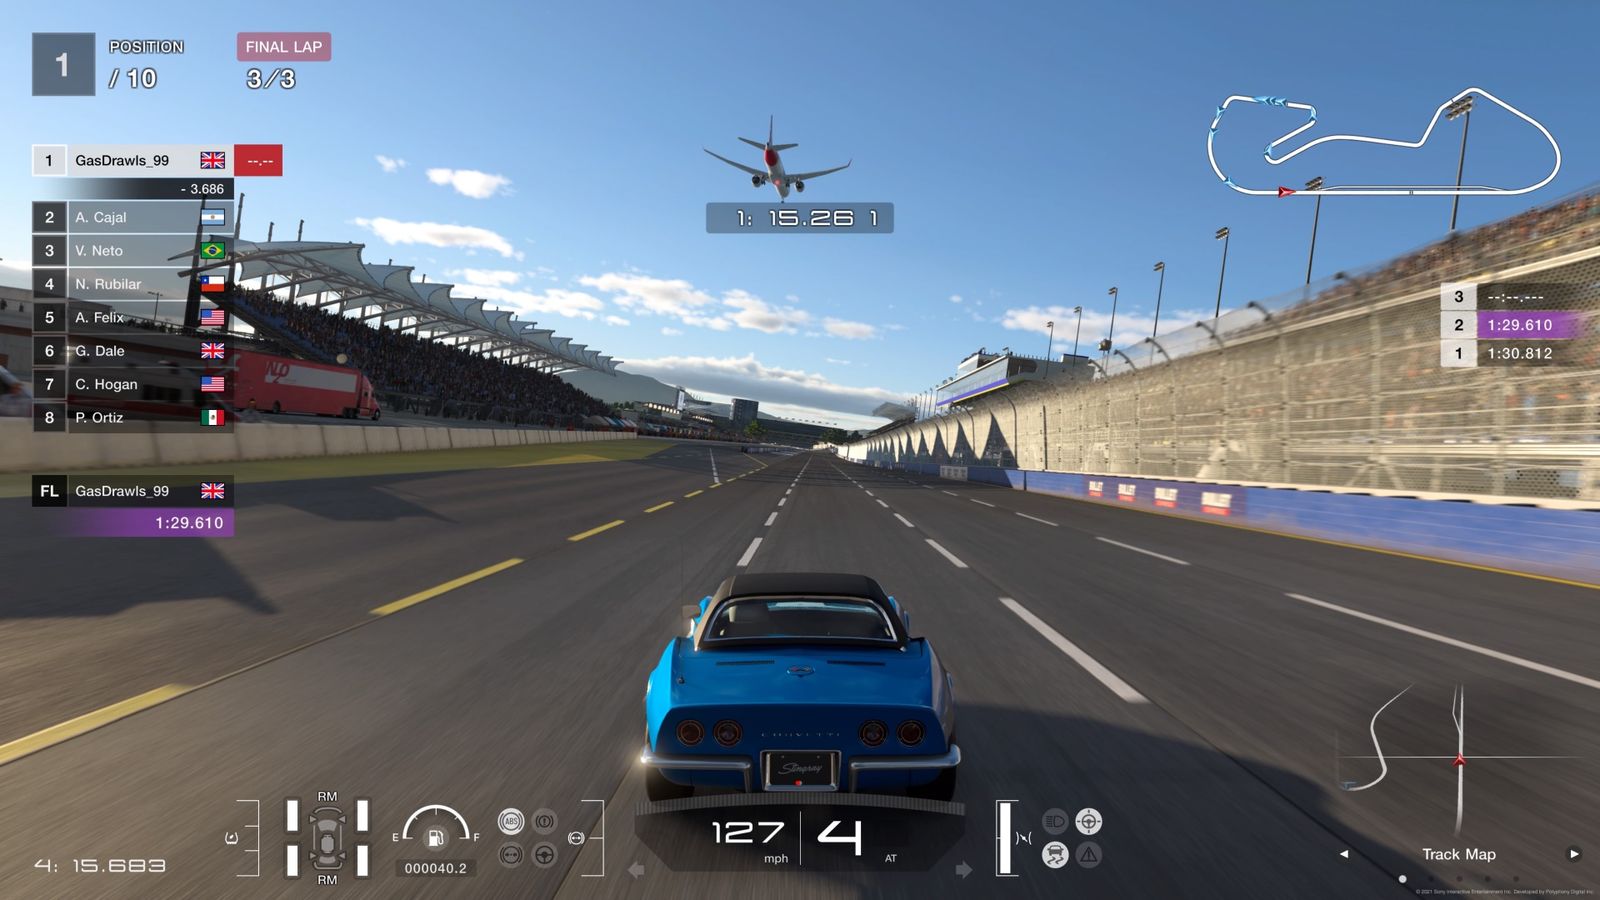 Image of a mid-race gameplay shot in Gran Turismo 7.